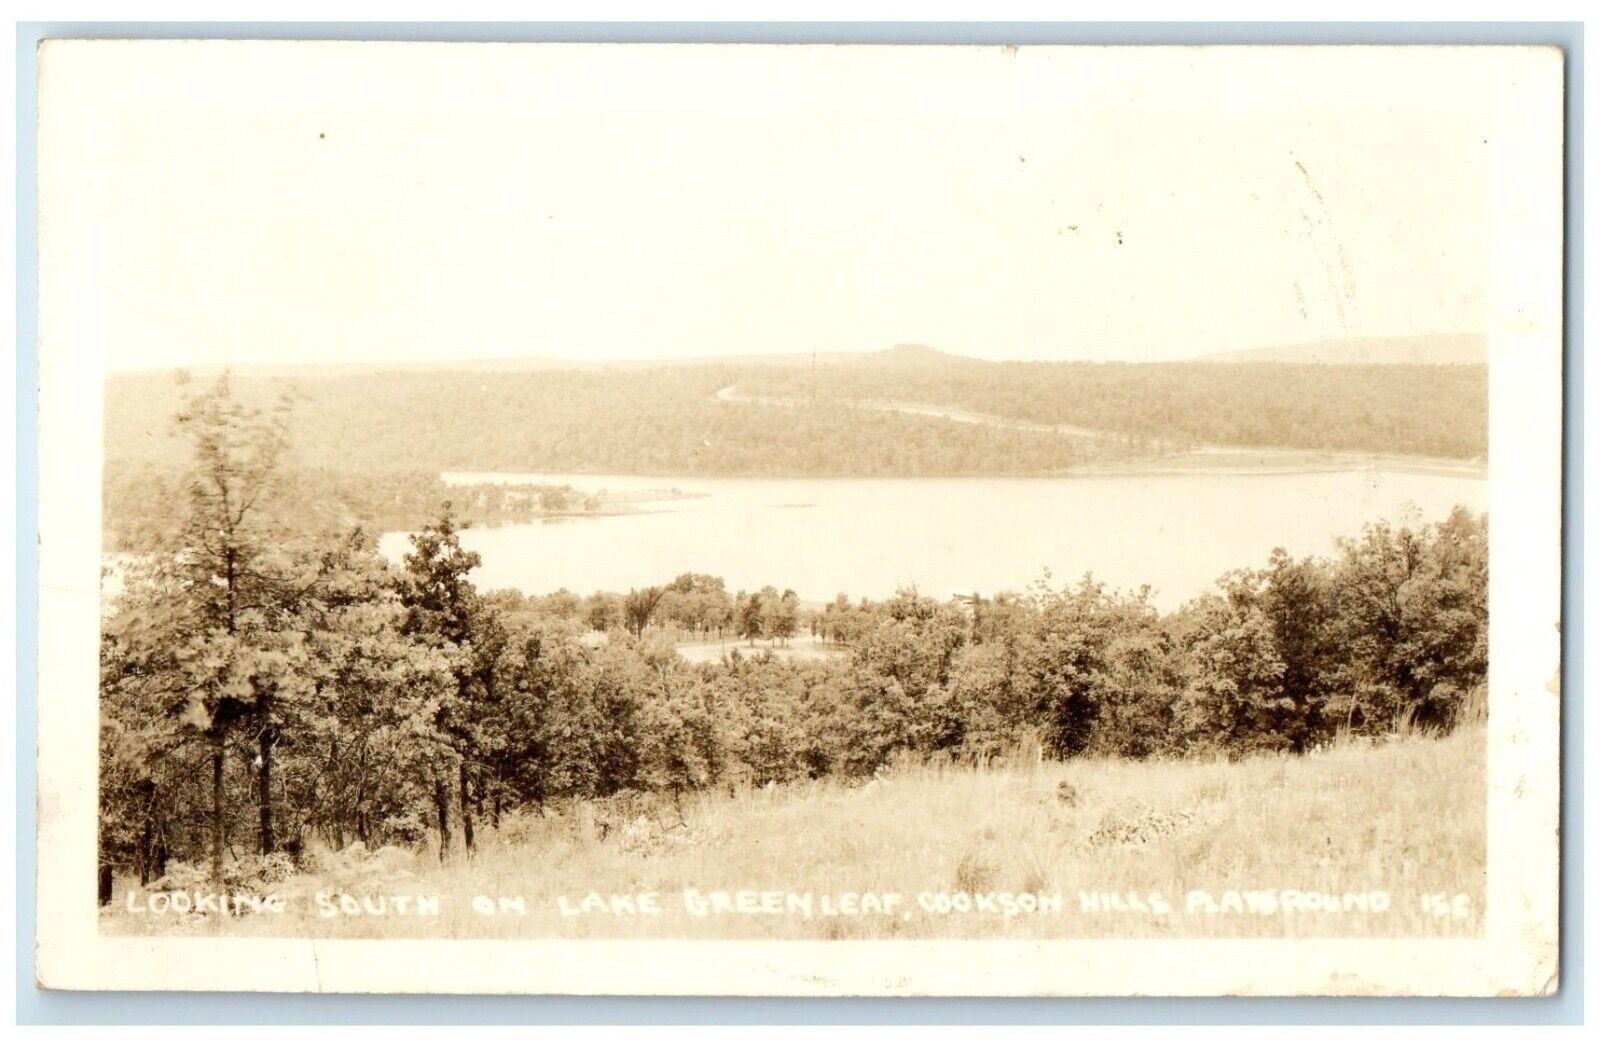 Looking South On Lake Green Leaf Cookson Nills Playground RPPC Photo Postcard